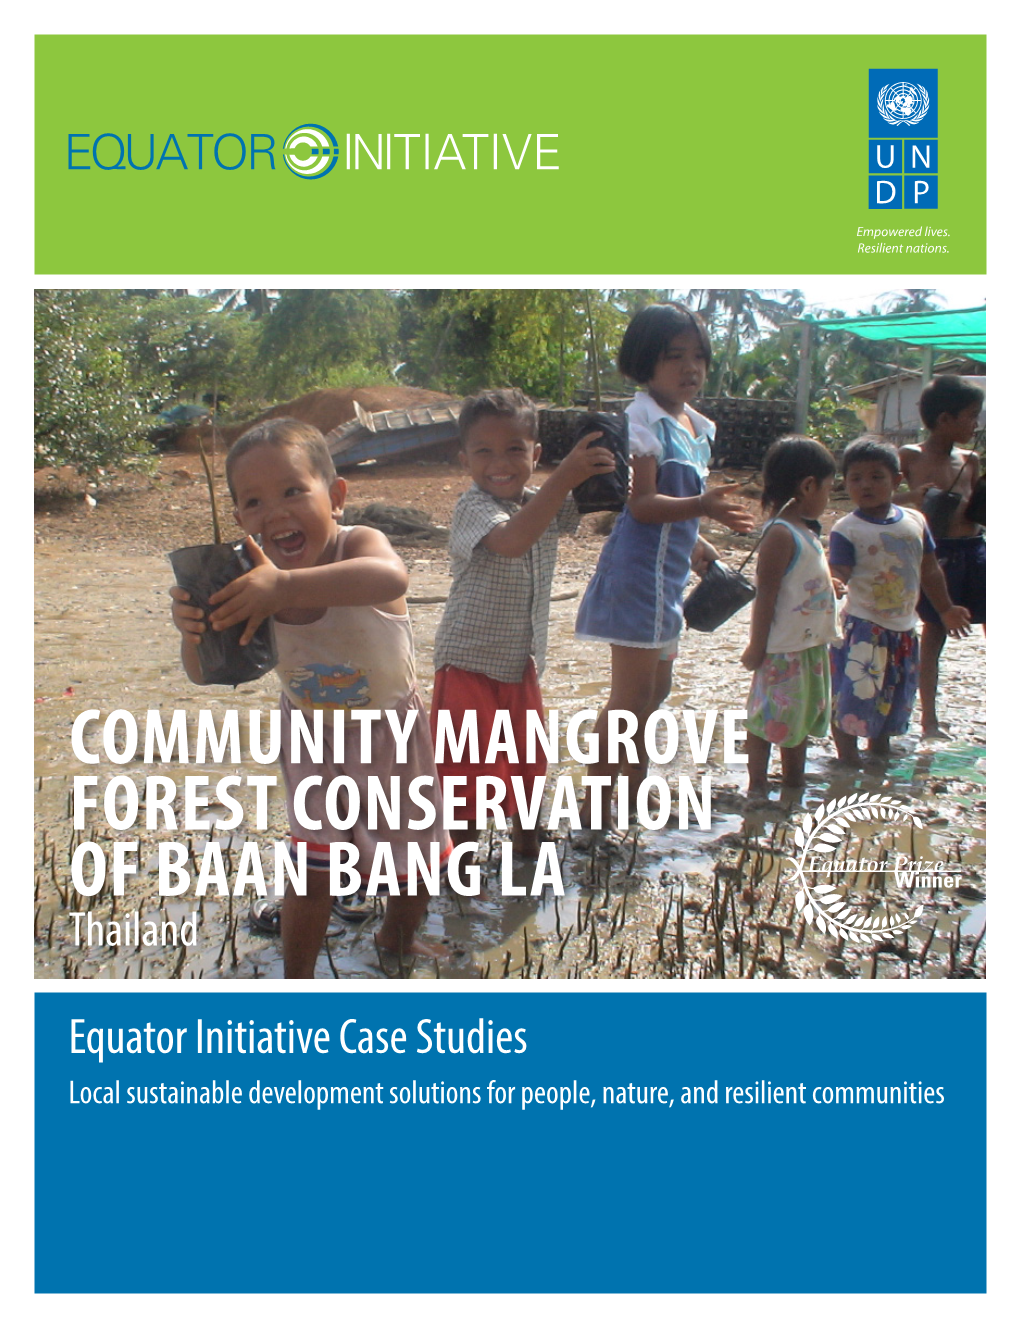 COMMUNITY MANGROVE FOREST CONSERVATION of BAAN BANG LA Thailand